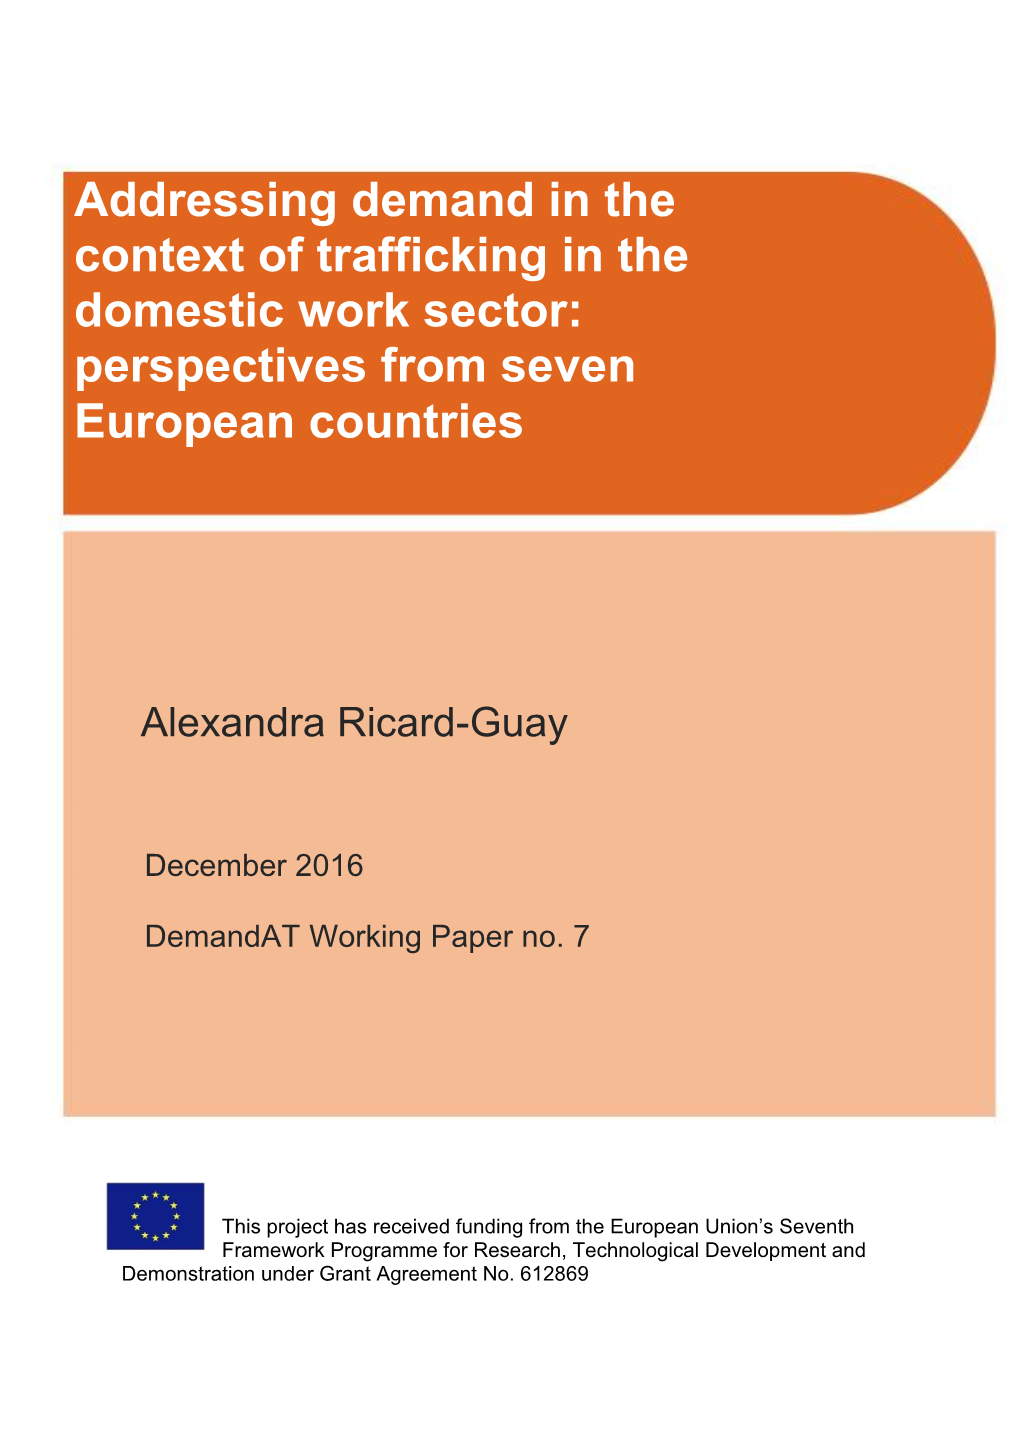 Addressing Demand in the Context of Trafficking in the Domestic Work Sector: Perspectives from Seven European Countries